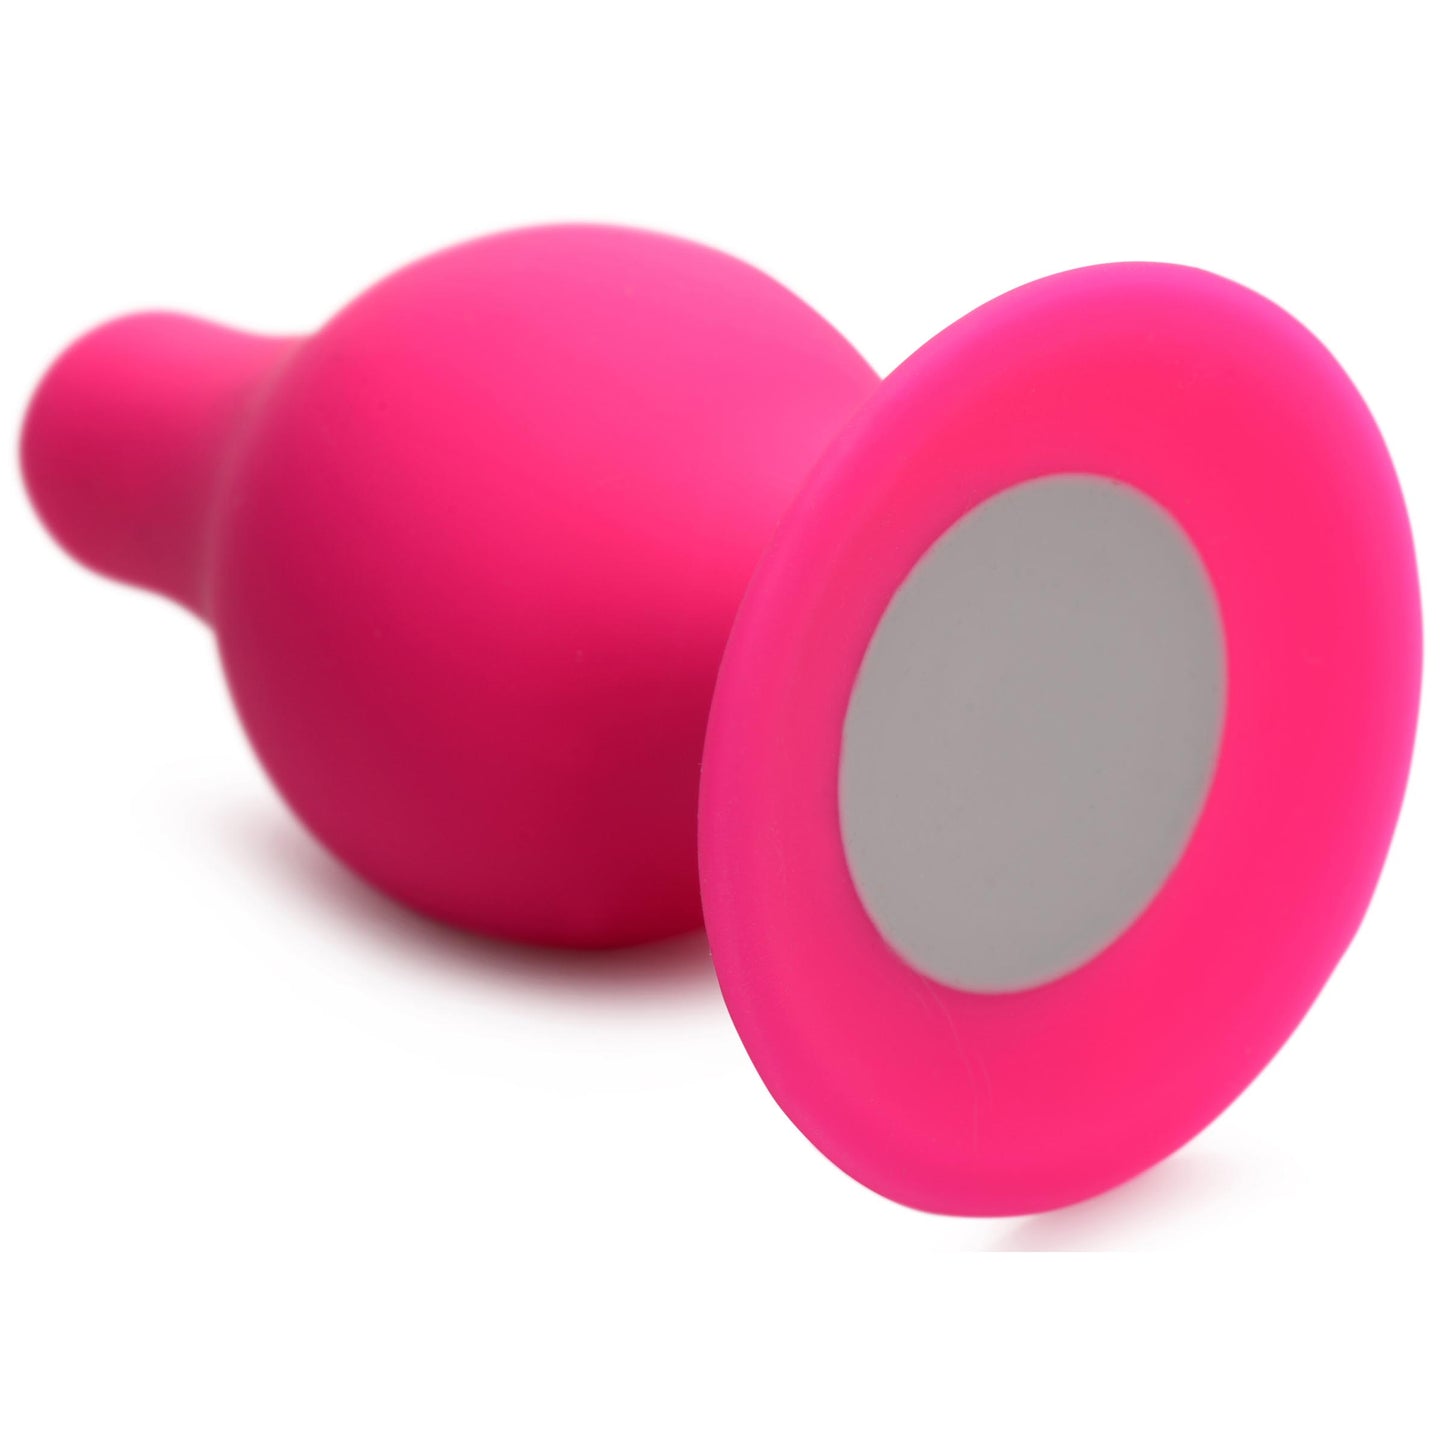 Squeezable Tapered Small Anal Plug - Pink - UABDSM